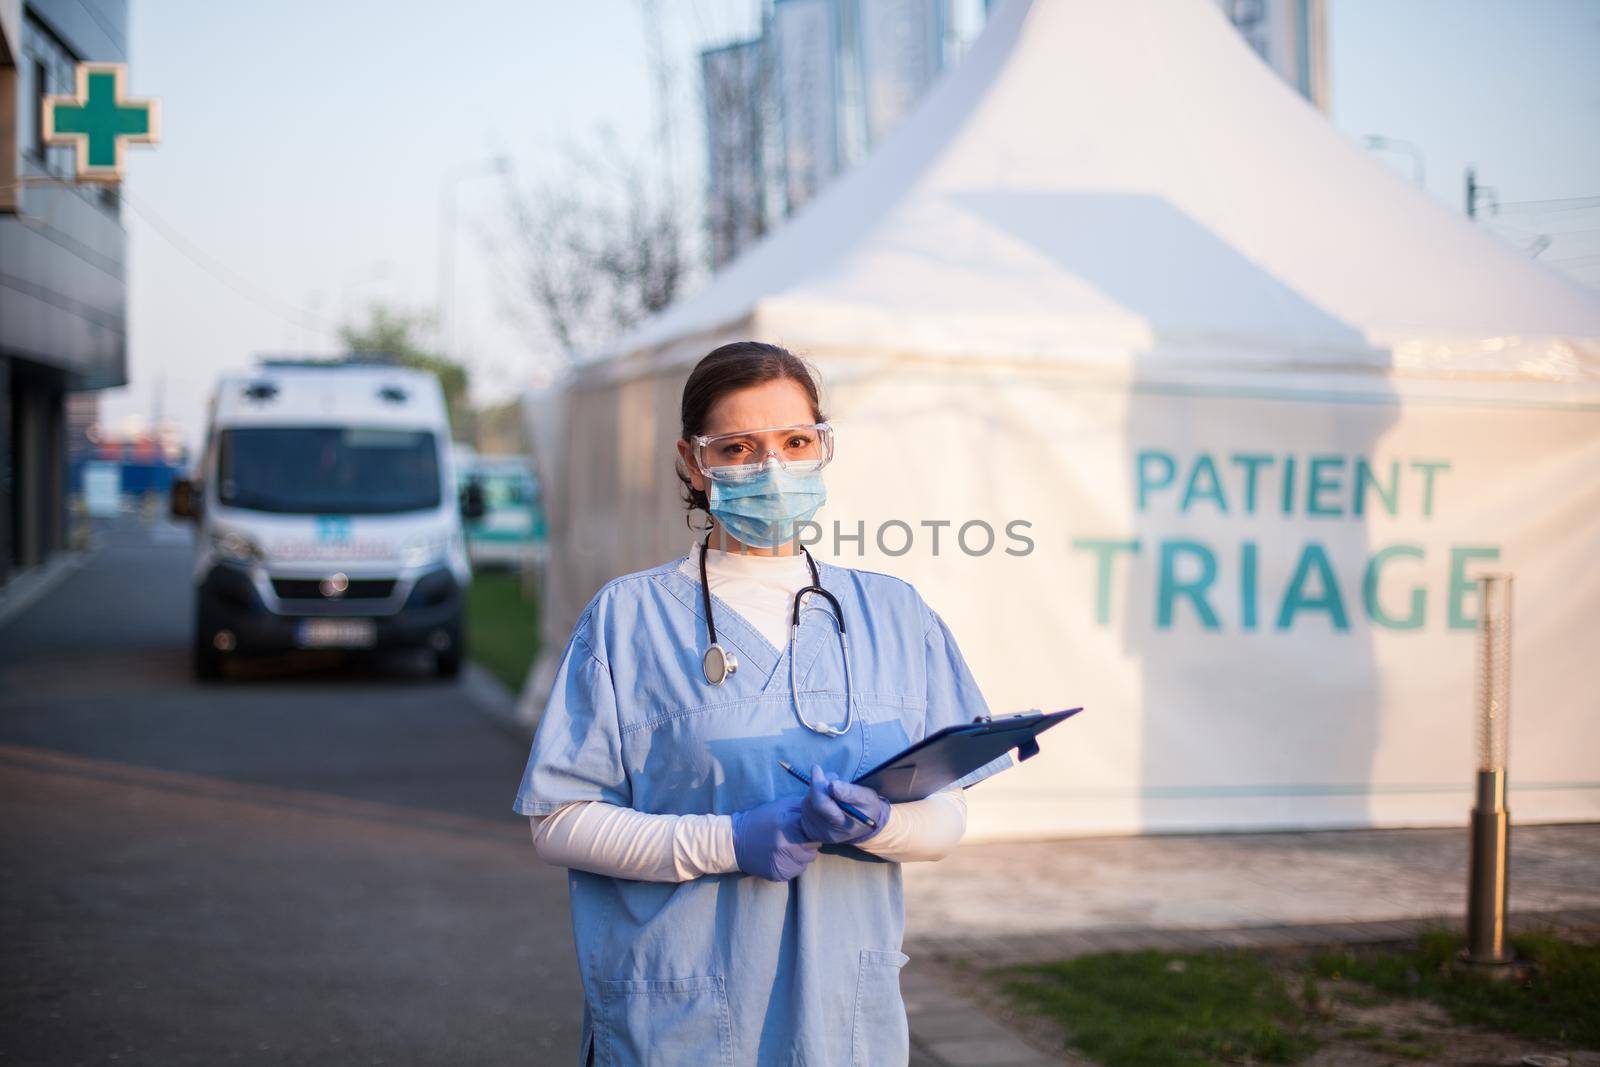 Portrait of serious female key front line worker in blue PPE uniform,standing outside EMS hospital or ICU clinic facility entrance,UK COVID-19 drive through testing site,rt-PCR Coronavirus diagnostic